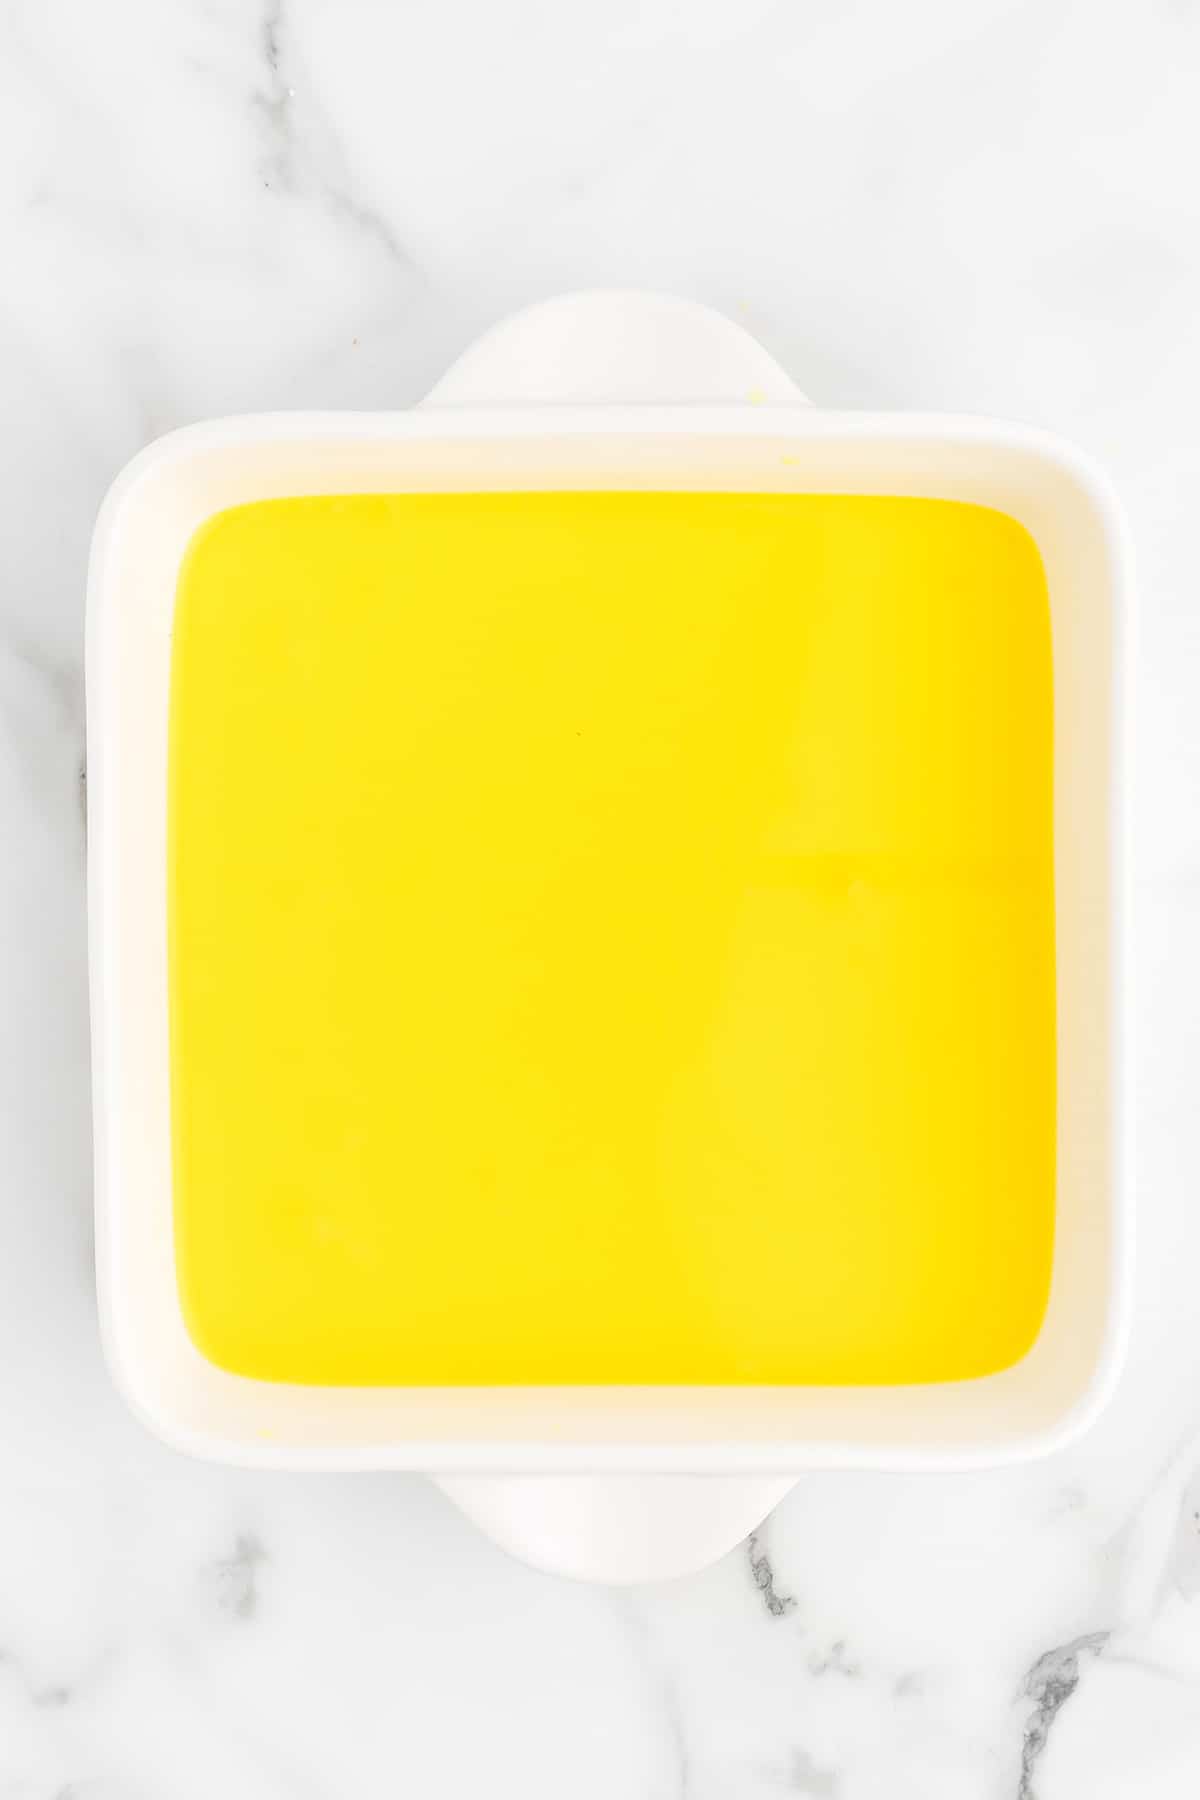 Jello and juice mixture in a square dish.